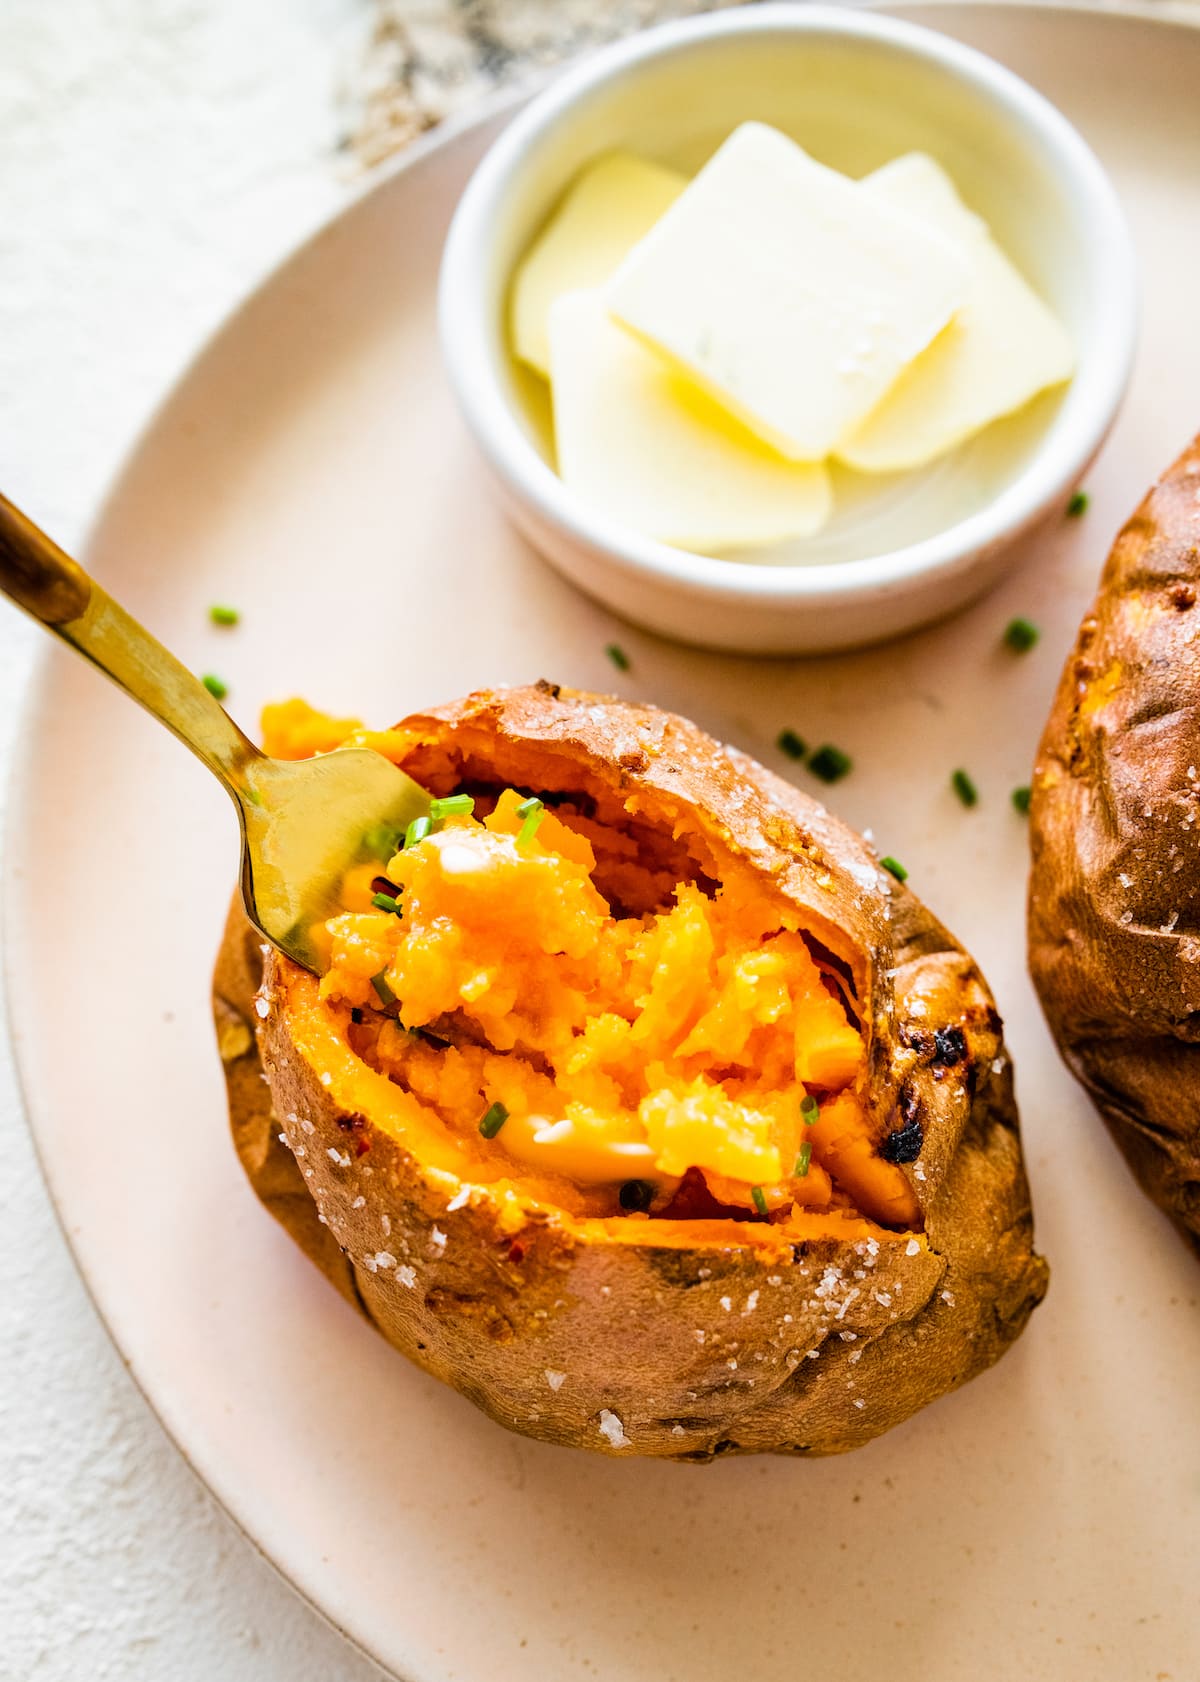 A fork inside a baked sweet potato that is on a plate.